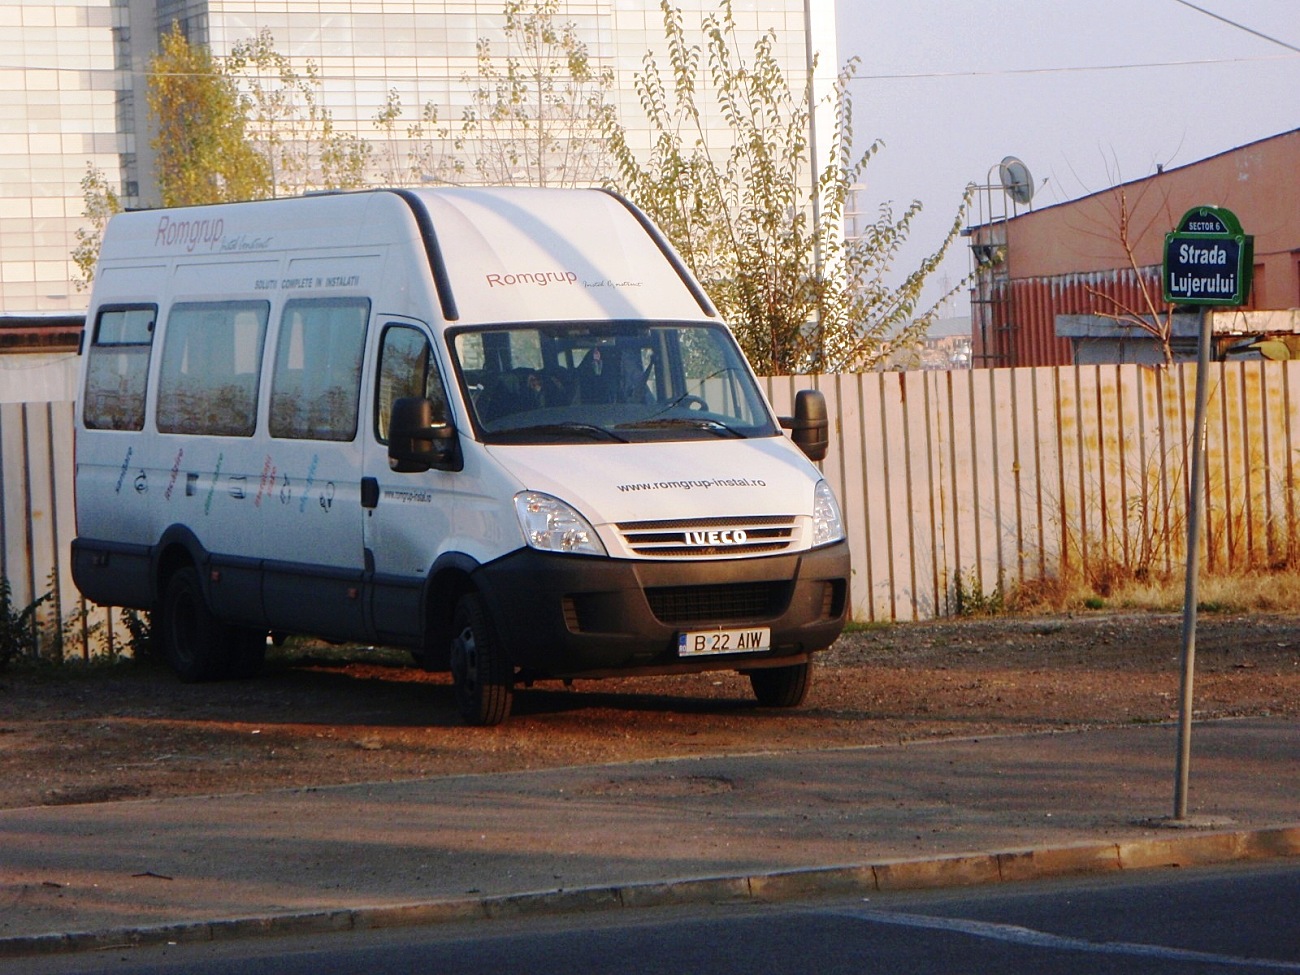 Iveco Daily (3 FL1) #B 22 AIW